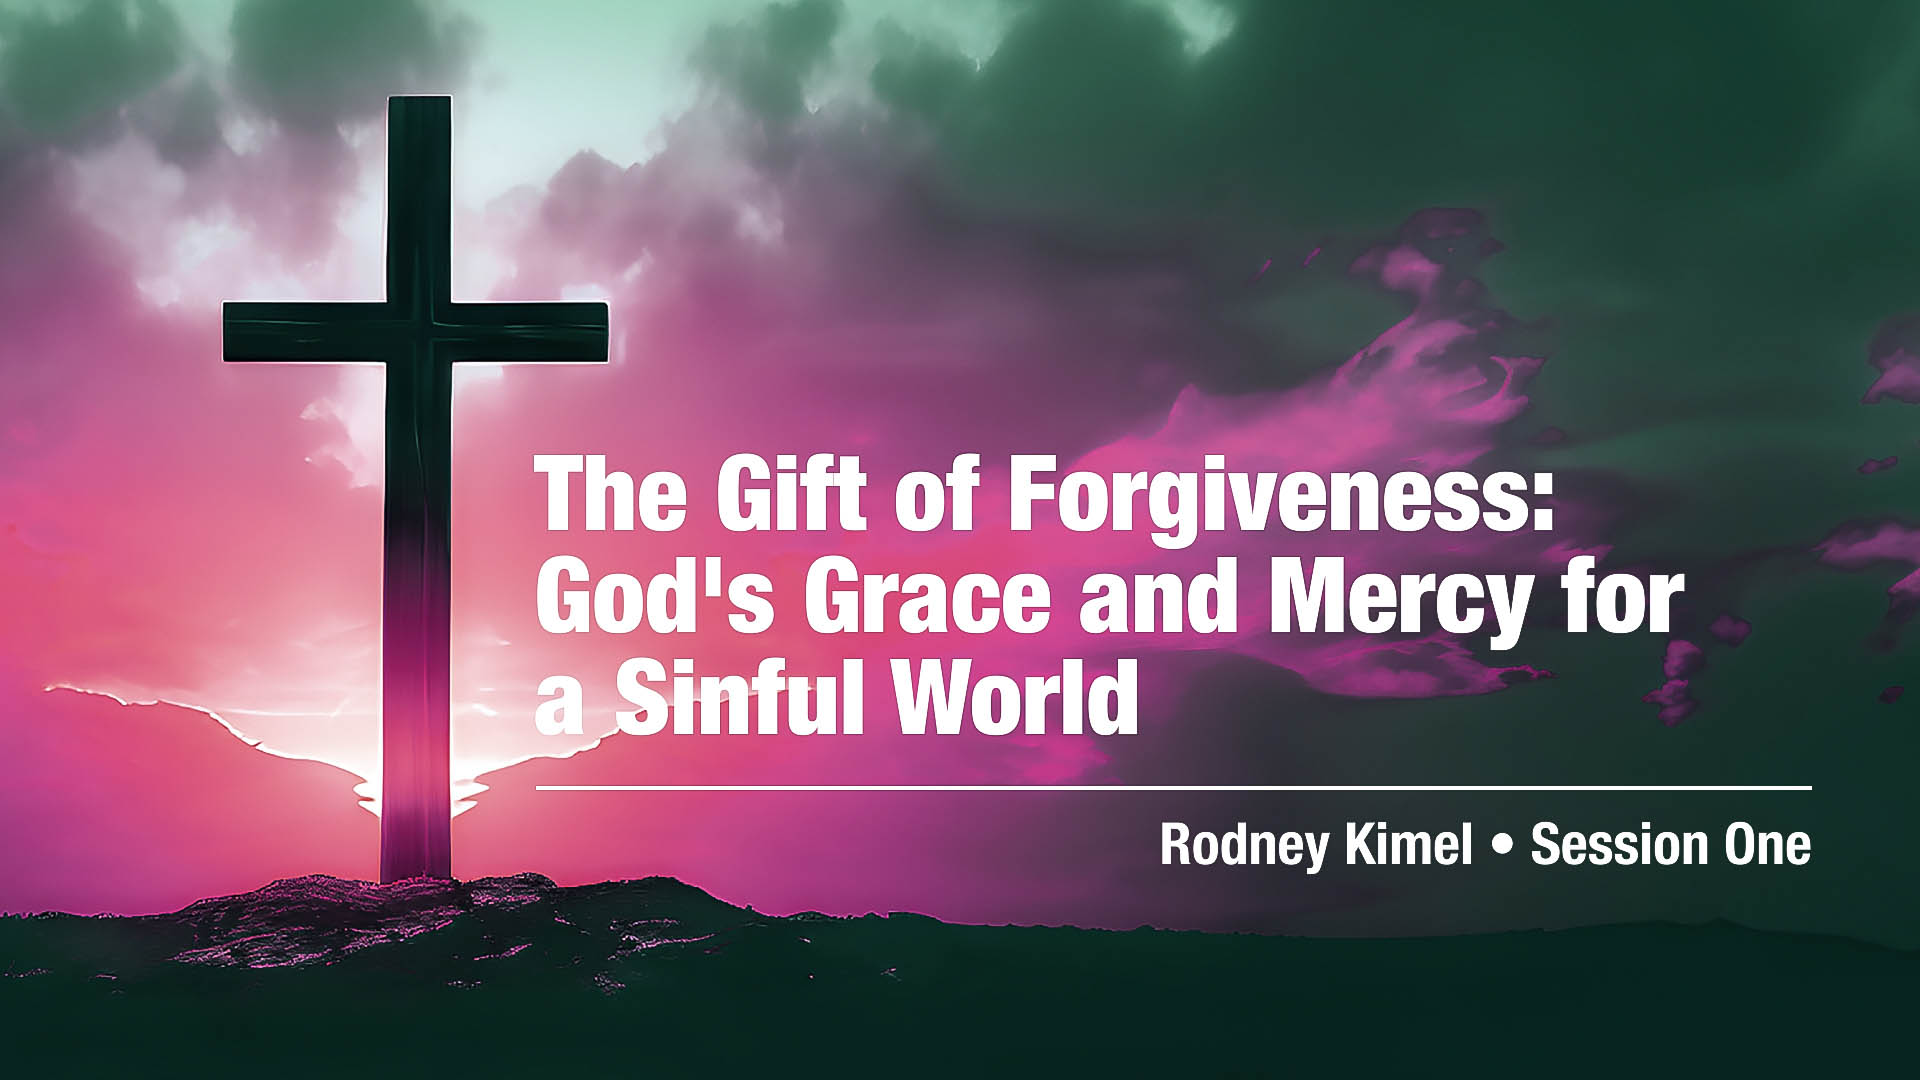 Dunkard Brethren Church| Leadership Conference | The Gift Of Forgiveness: God's Grace And Mercy For A Sinful World